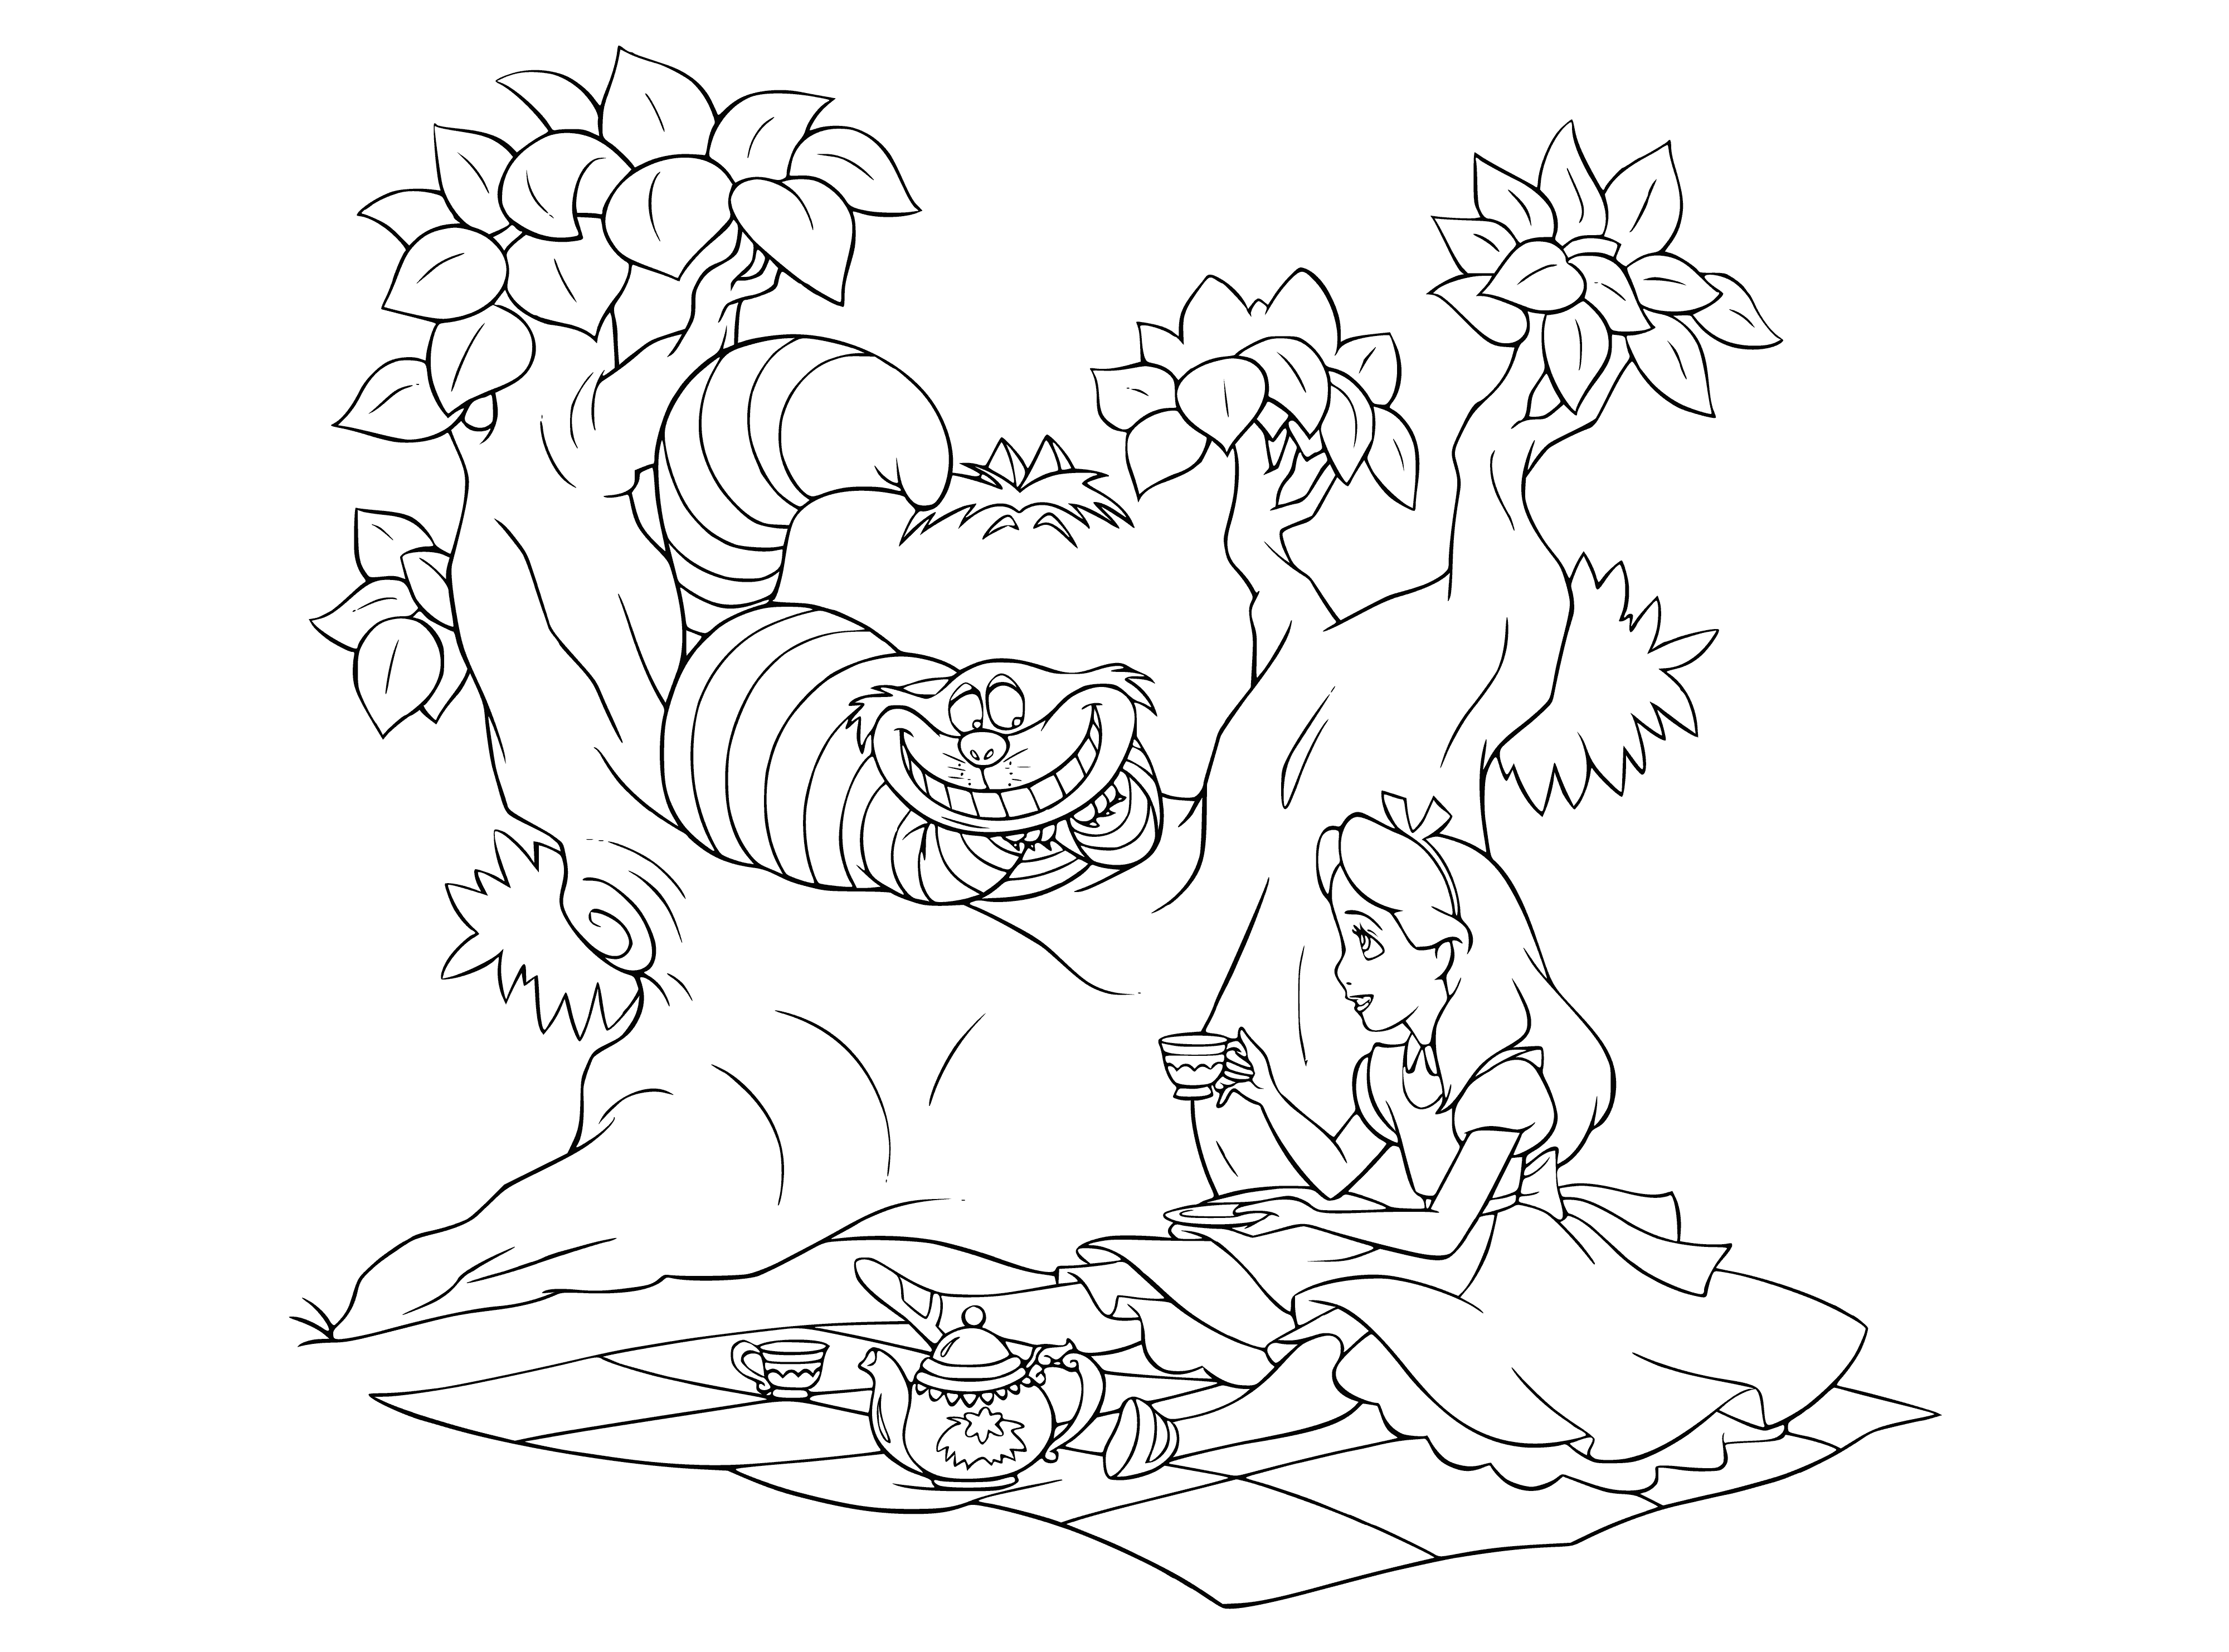 Tea party with a cheshire cat coloring page